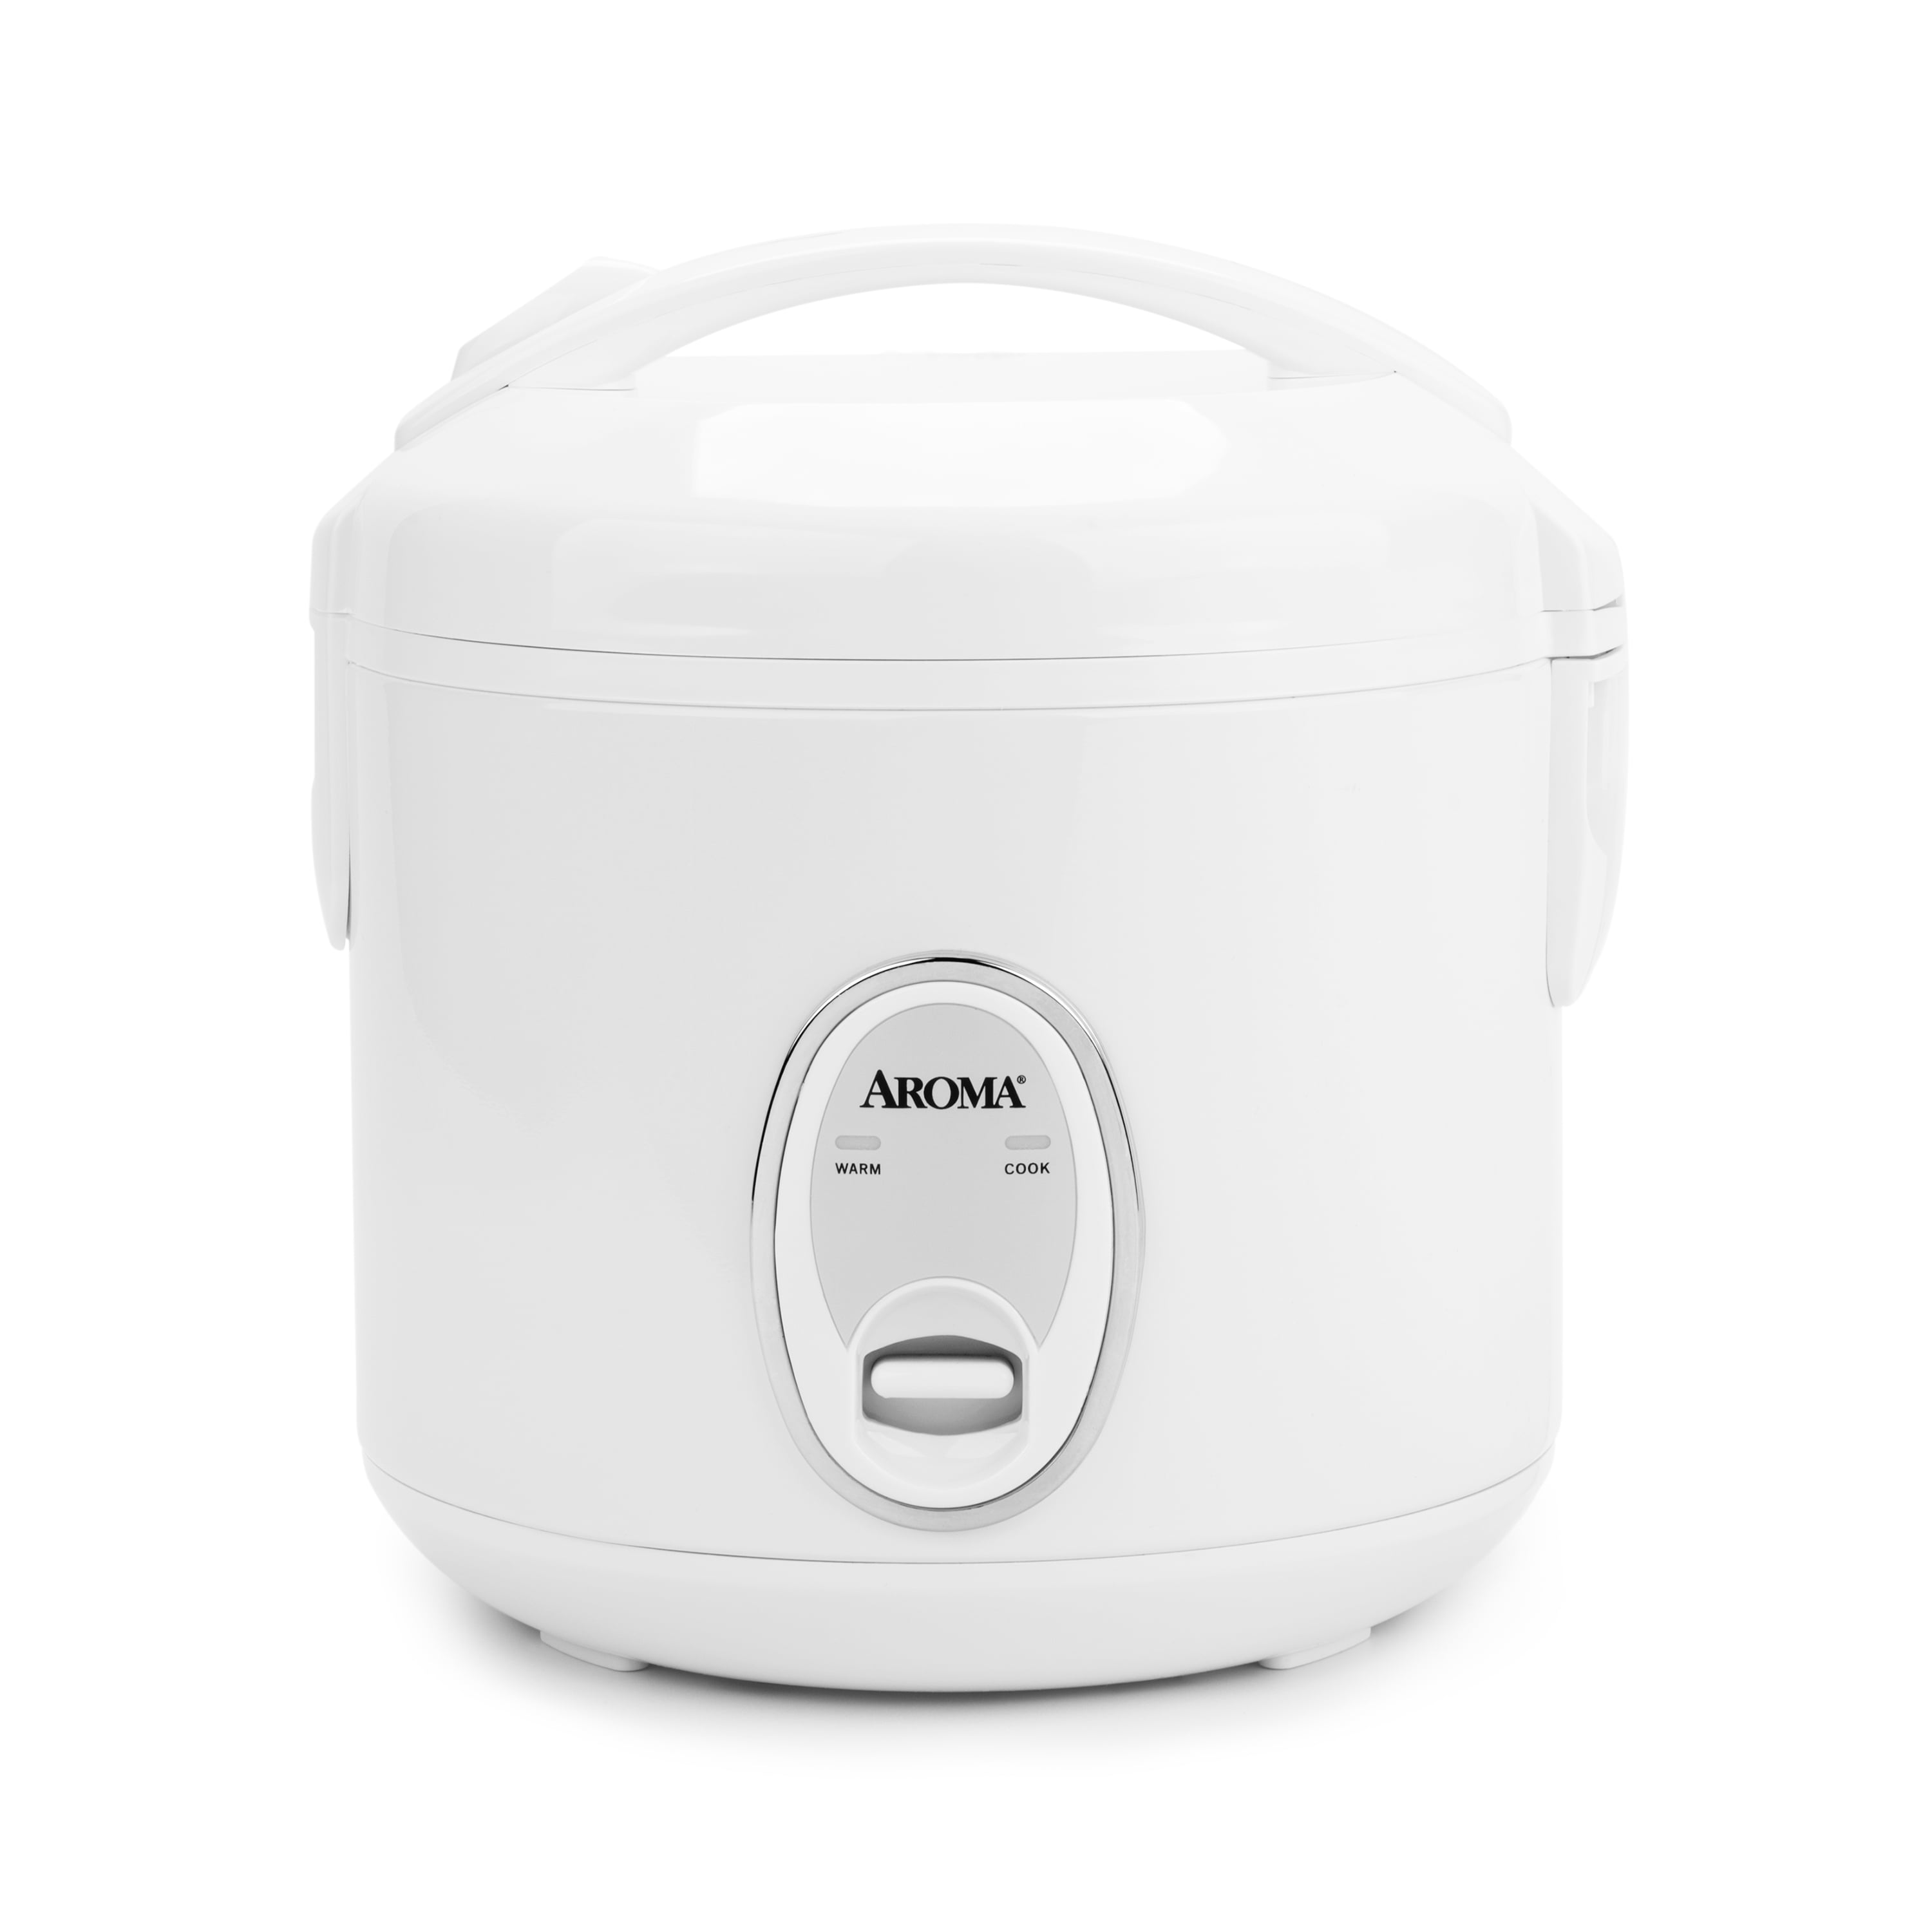 Aroma Professional Cool Touch 8-cup Stainless Steel Rice Cooker